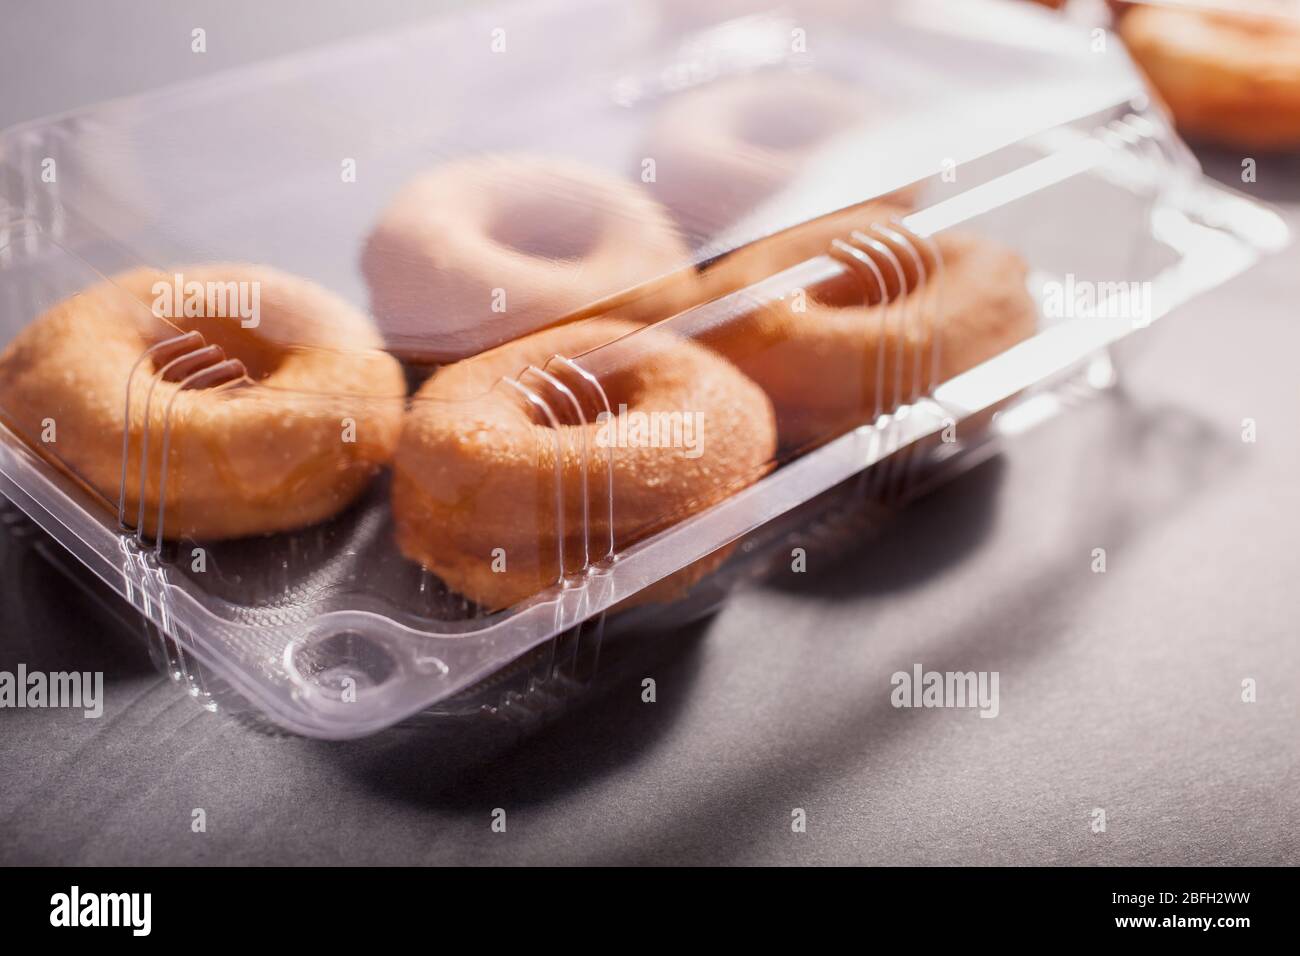 Delicious donuts in a plastic container Stock Photo